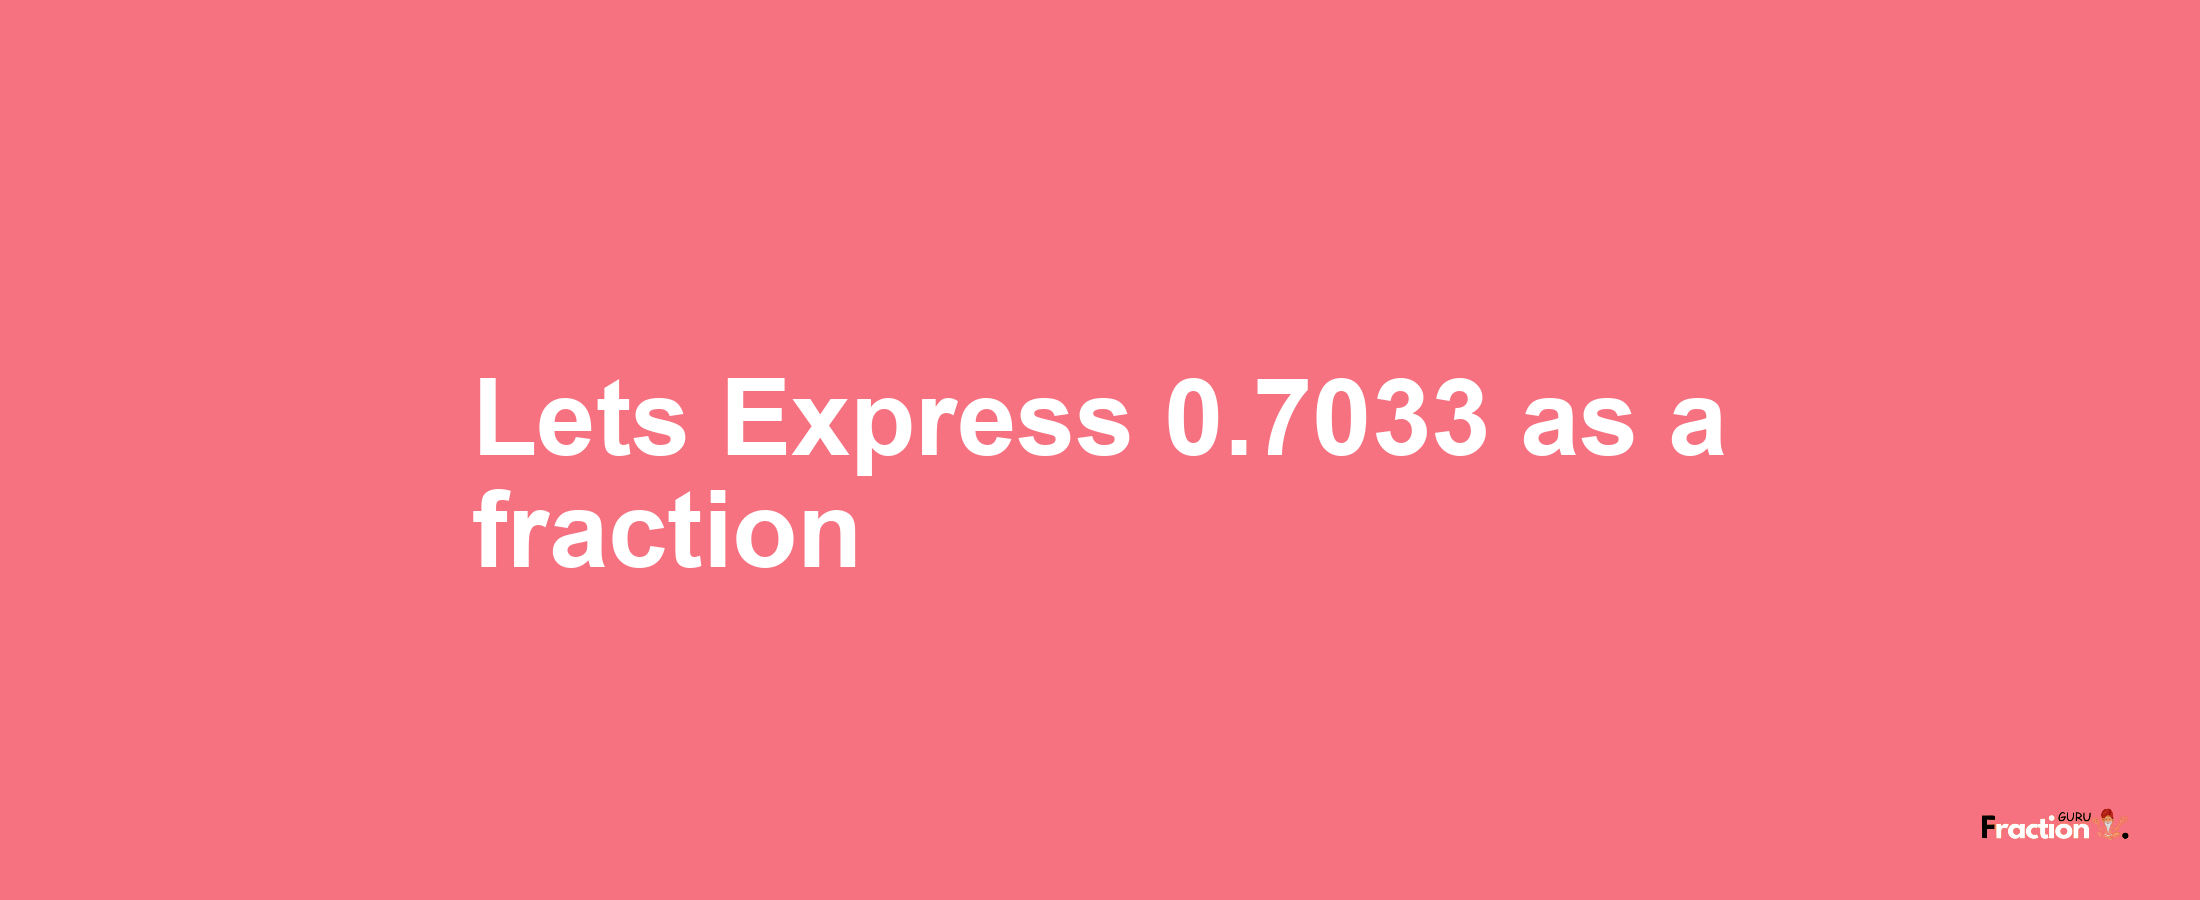 Lets Express 0.7033 as afraction